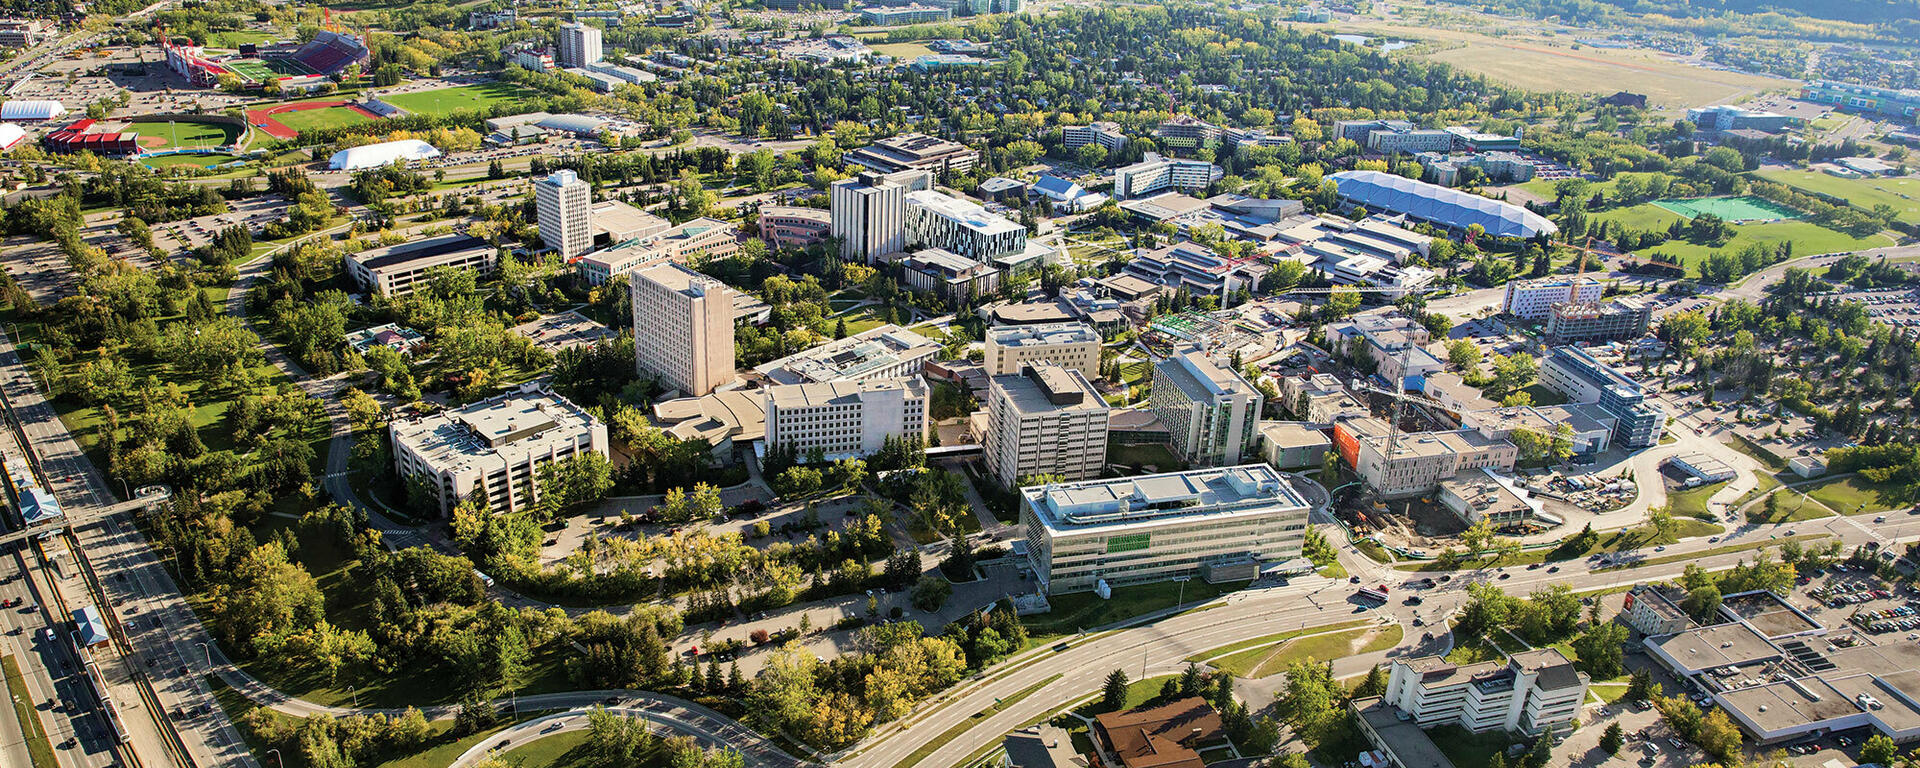 Areal view of UCalgary campus